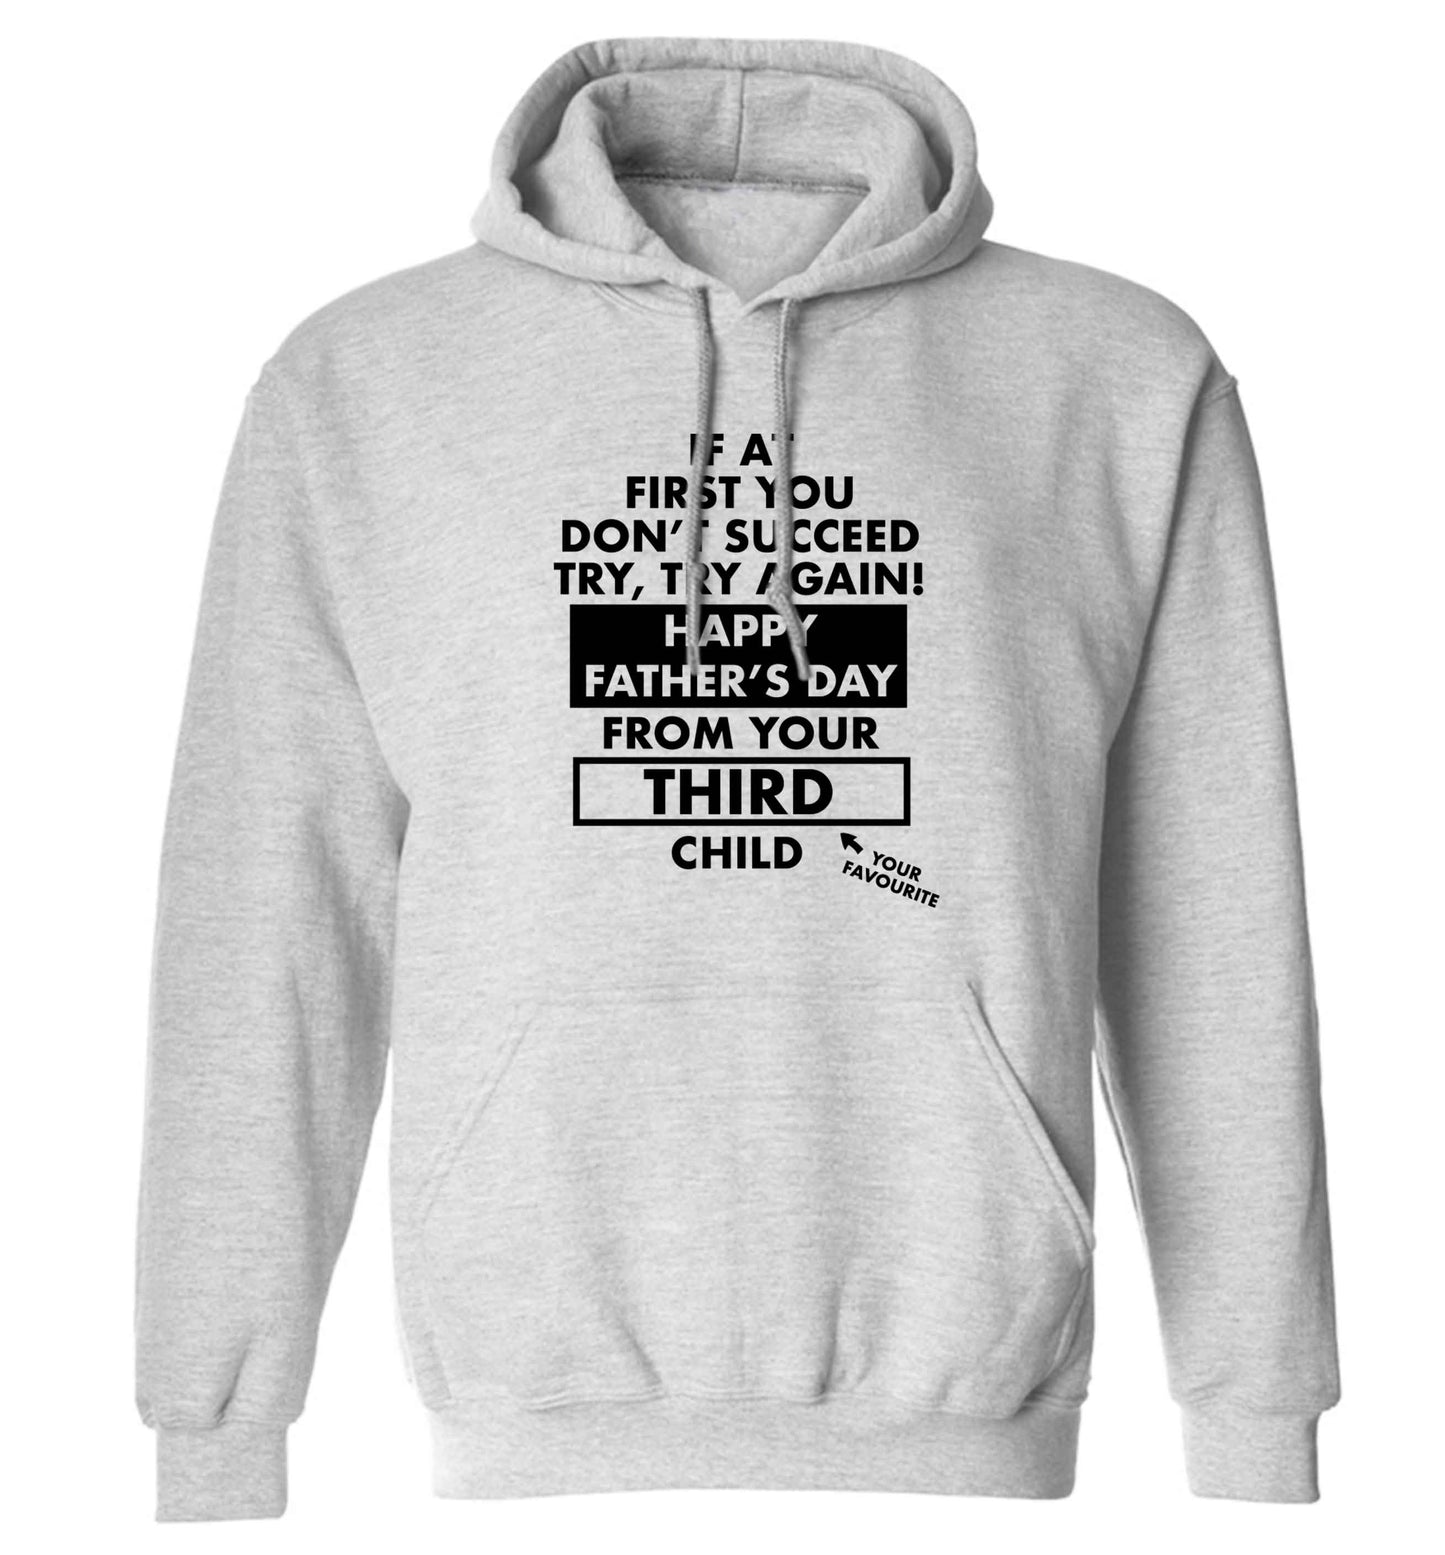 If at first you don't succeed try, try again Happy Father's day from your third child! adults unisex grey hoodie 2XL